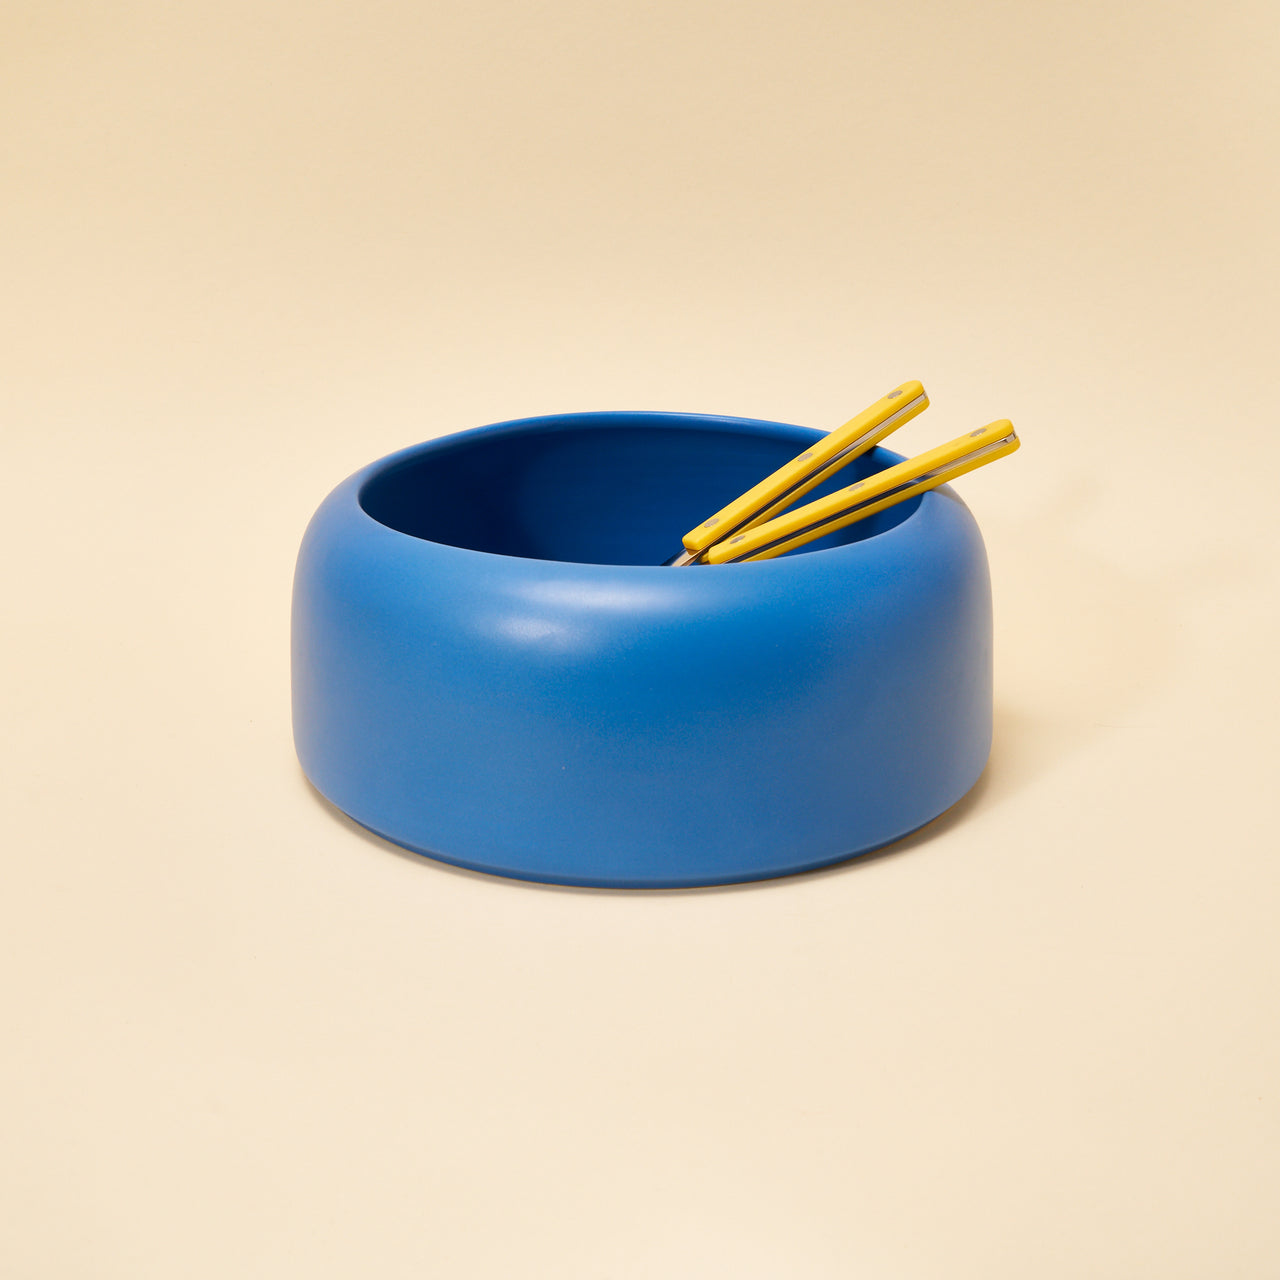 Omar/Raawii Small Serving Bowl